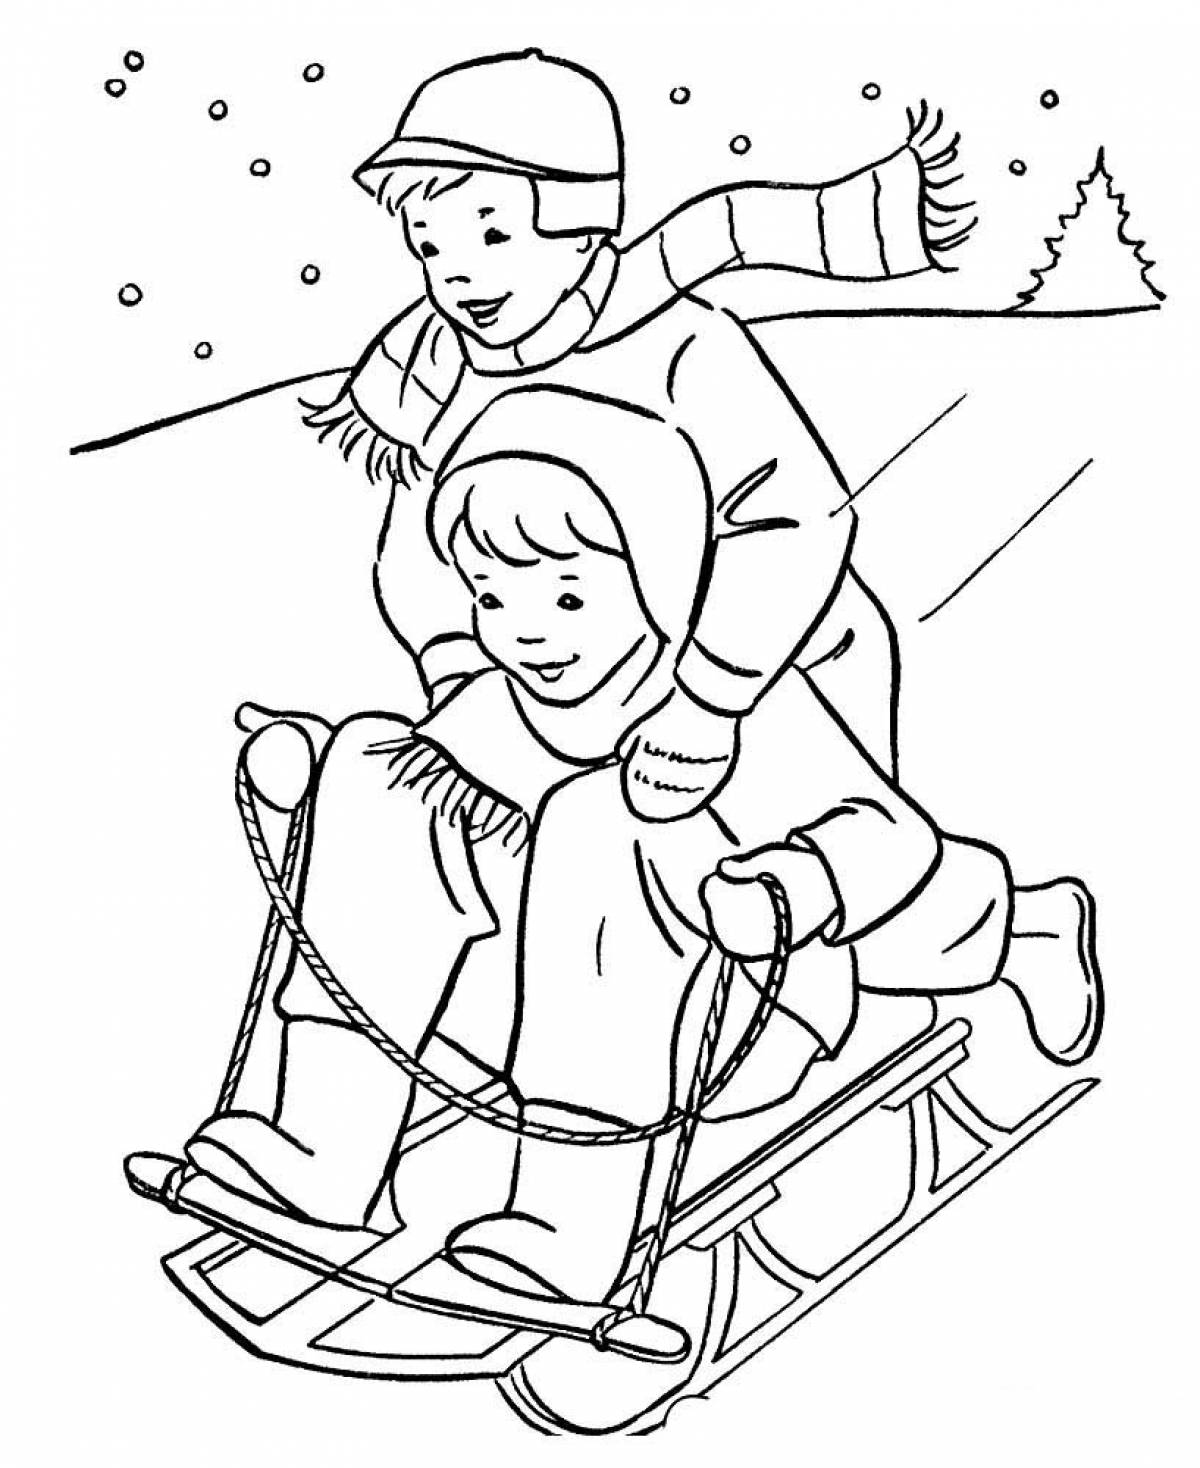 Guys on the sled